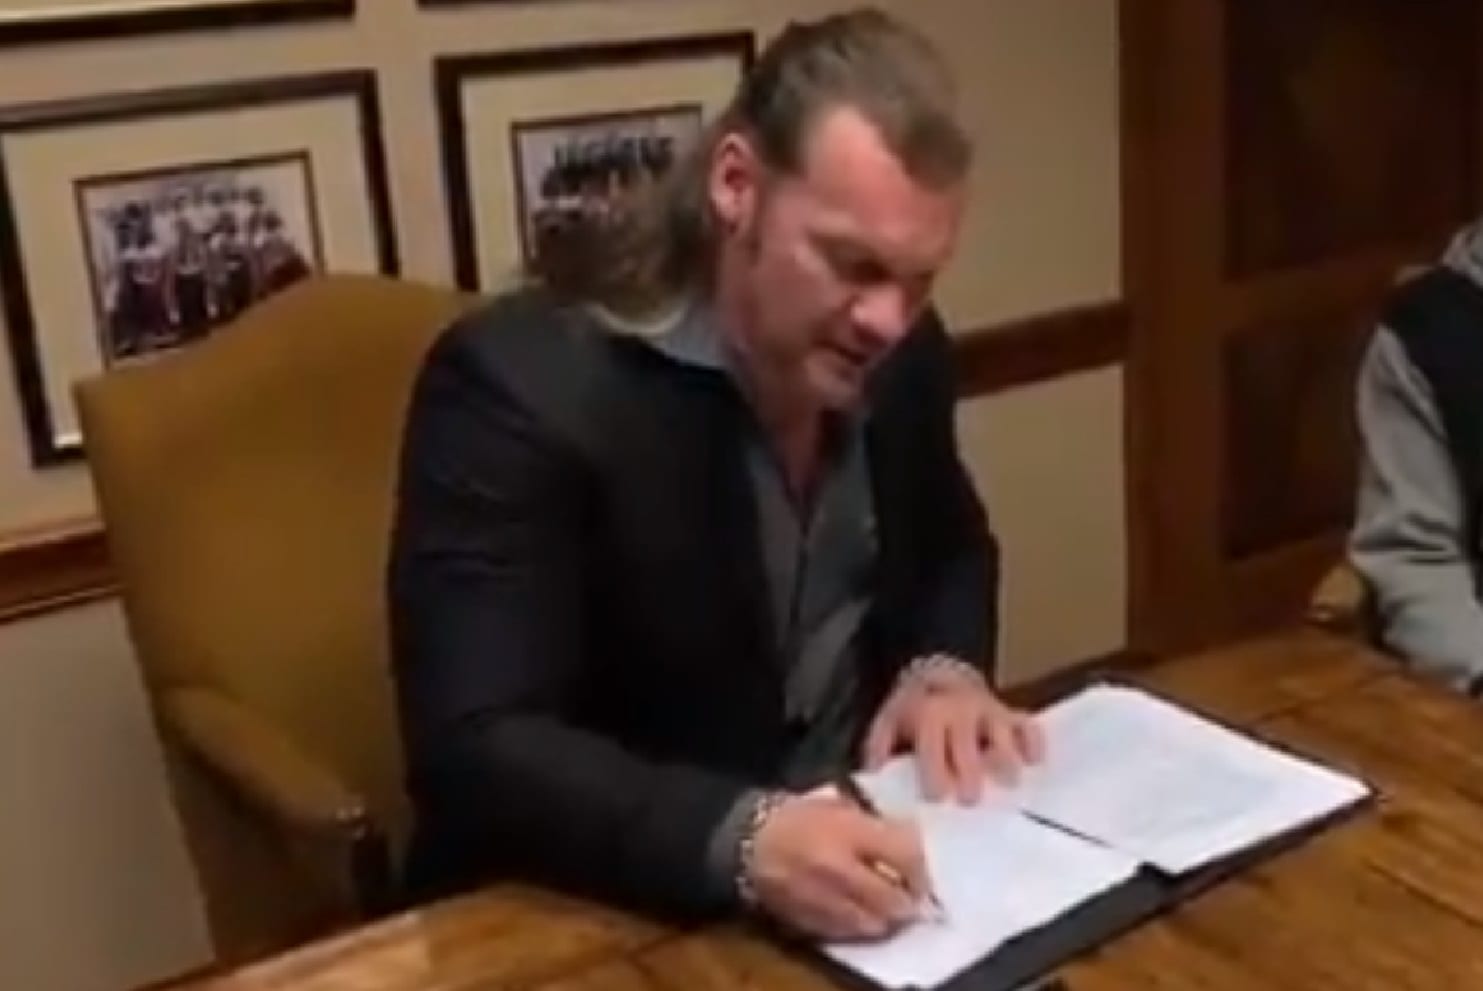 Watch Chris Jericho Sign His All Elite Wrestling Contract